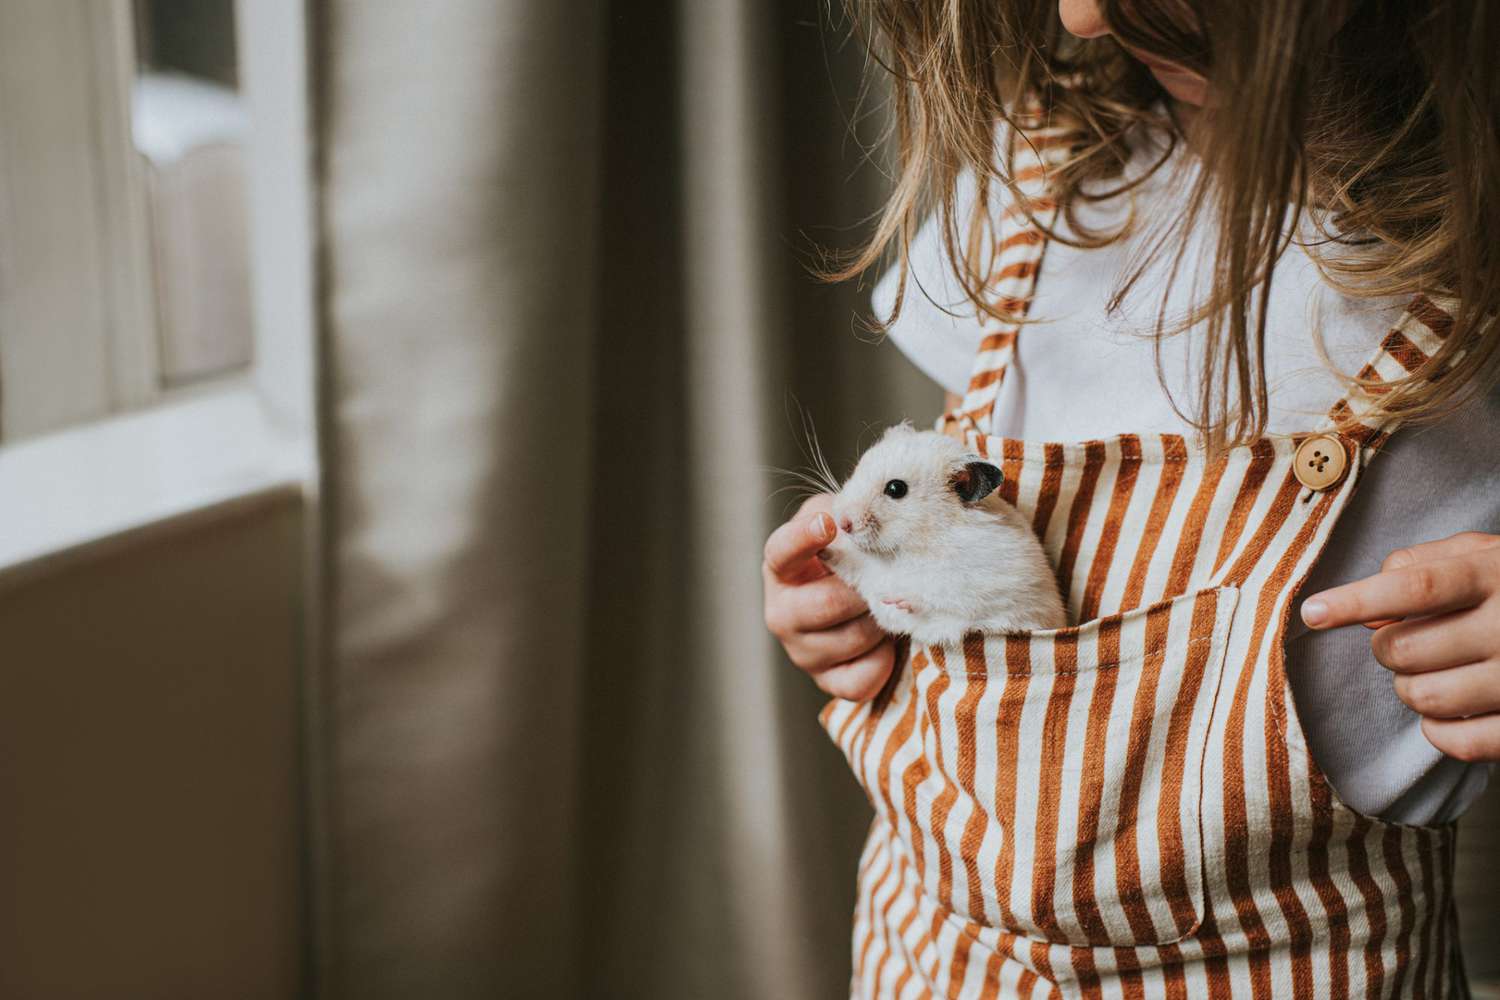 An image of a child holding a hamster.